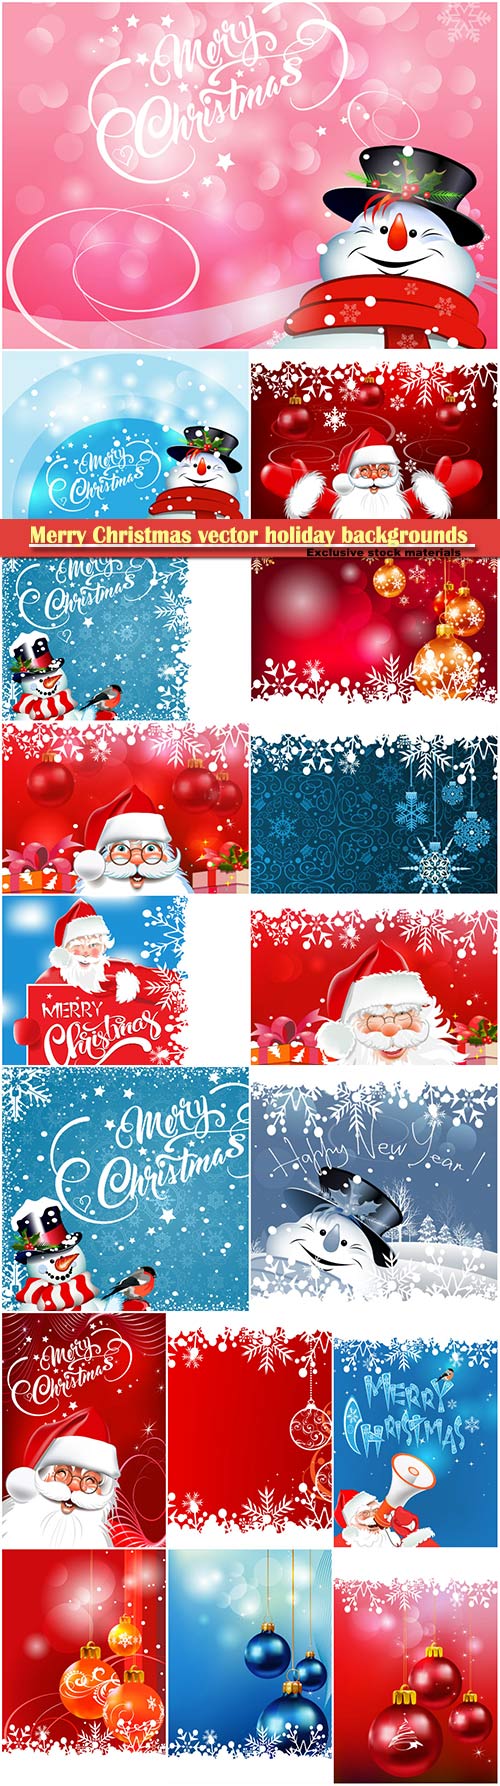 Christmas vector holiday backgrounds, Santa Claus, snowman, Christmas decorations and snowflakes # 5